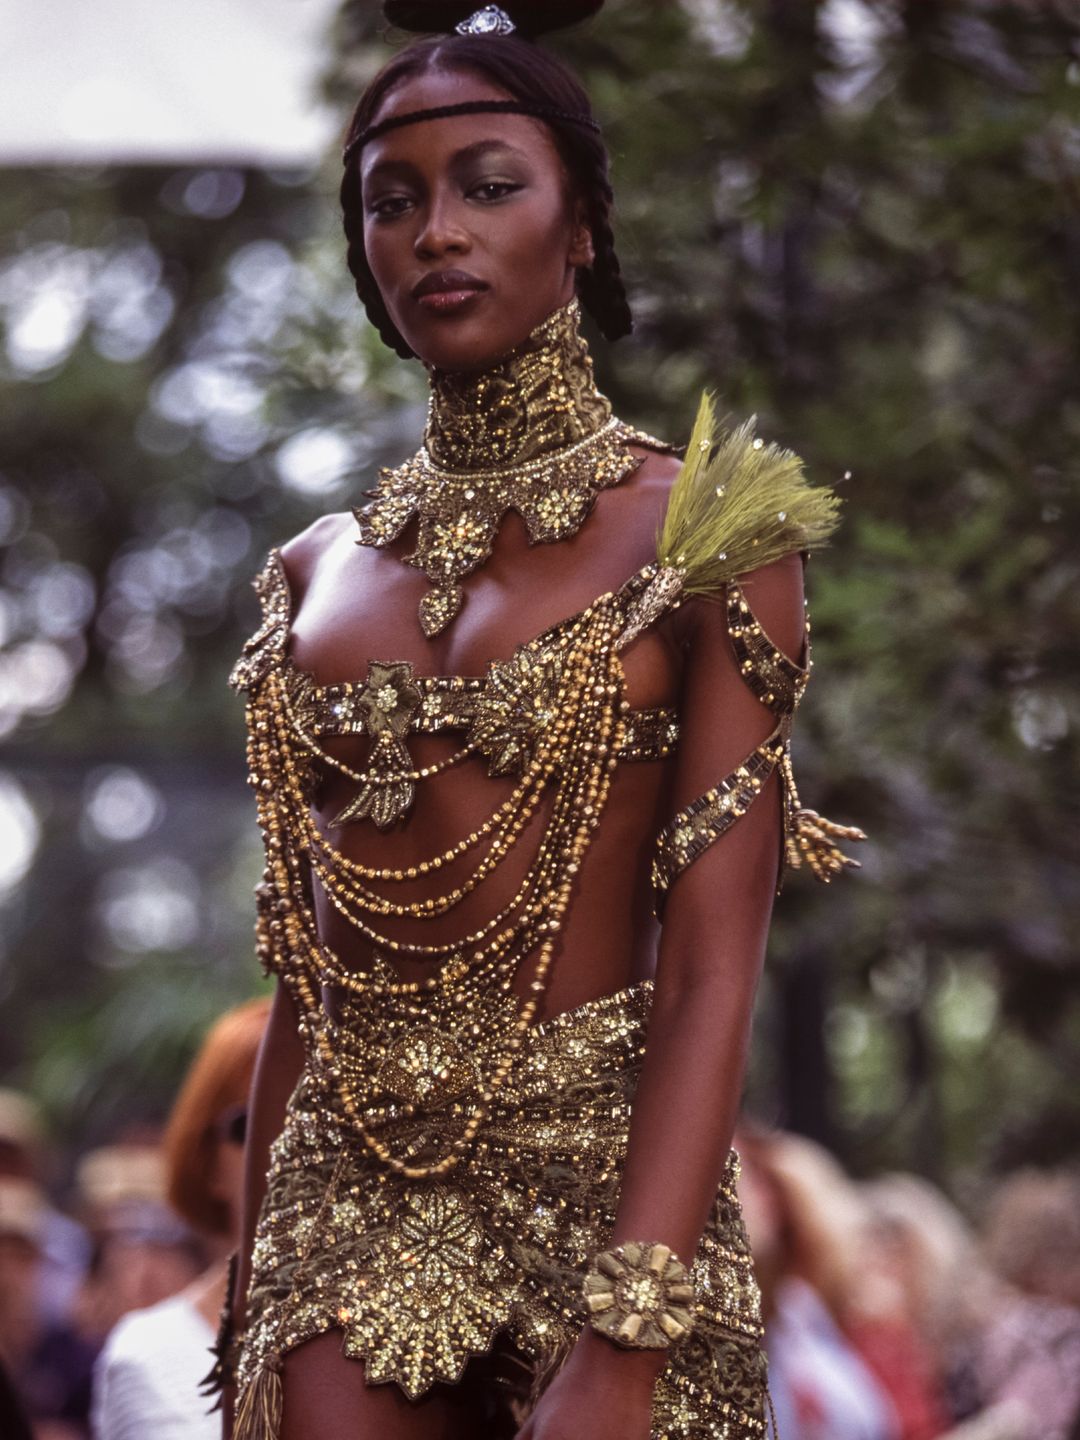 Naomi Campbell wearing a gold beaded micro top with layered necklaces 